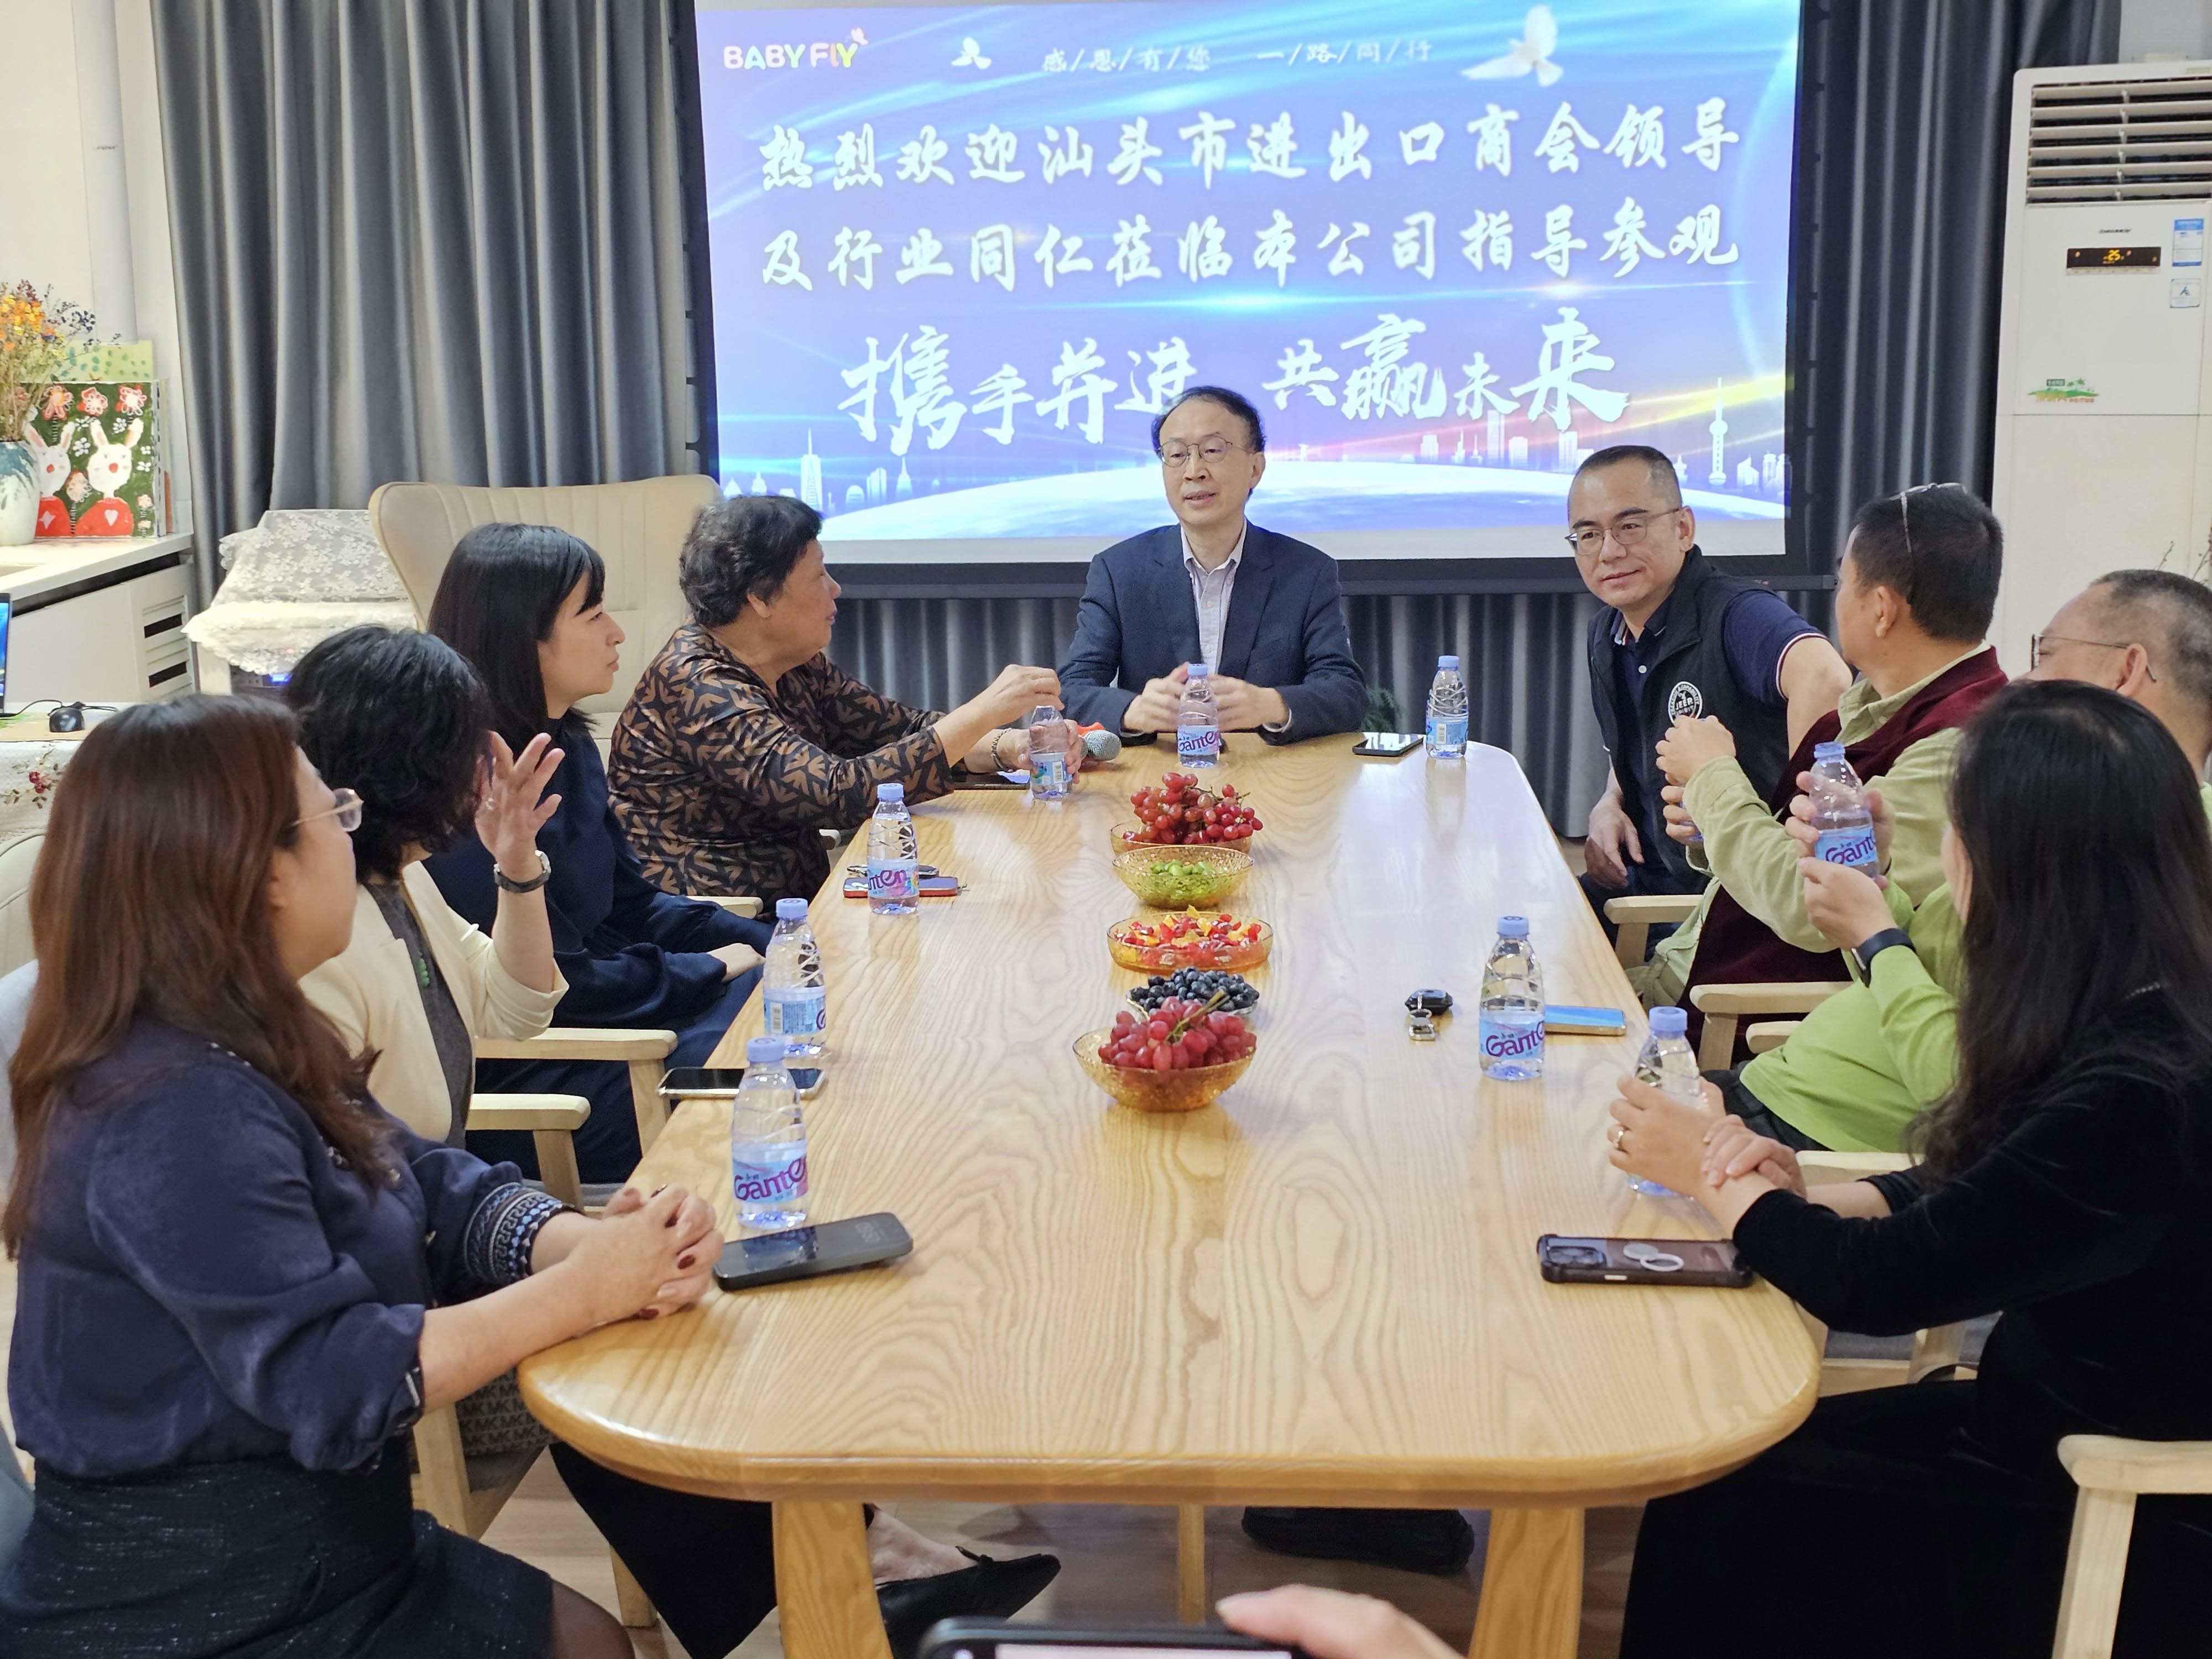 Shantou-Business-Association-Leaders-Conduct-Inspection-and-Tour-at-Yidaxing